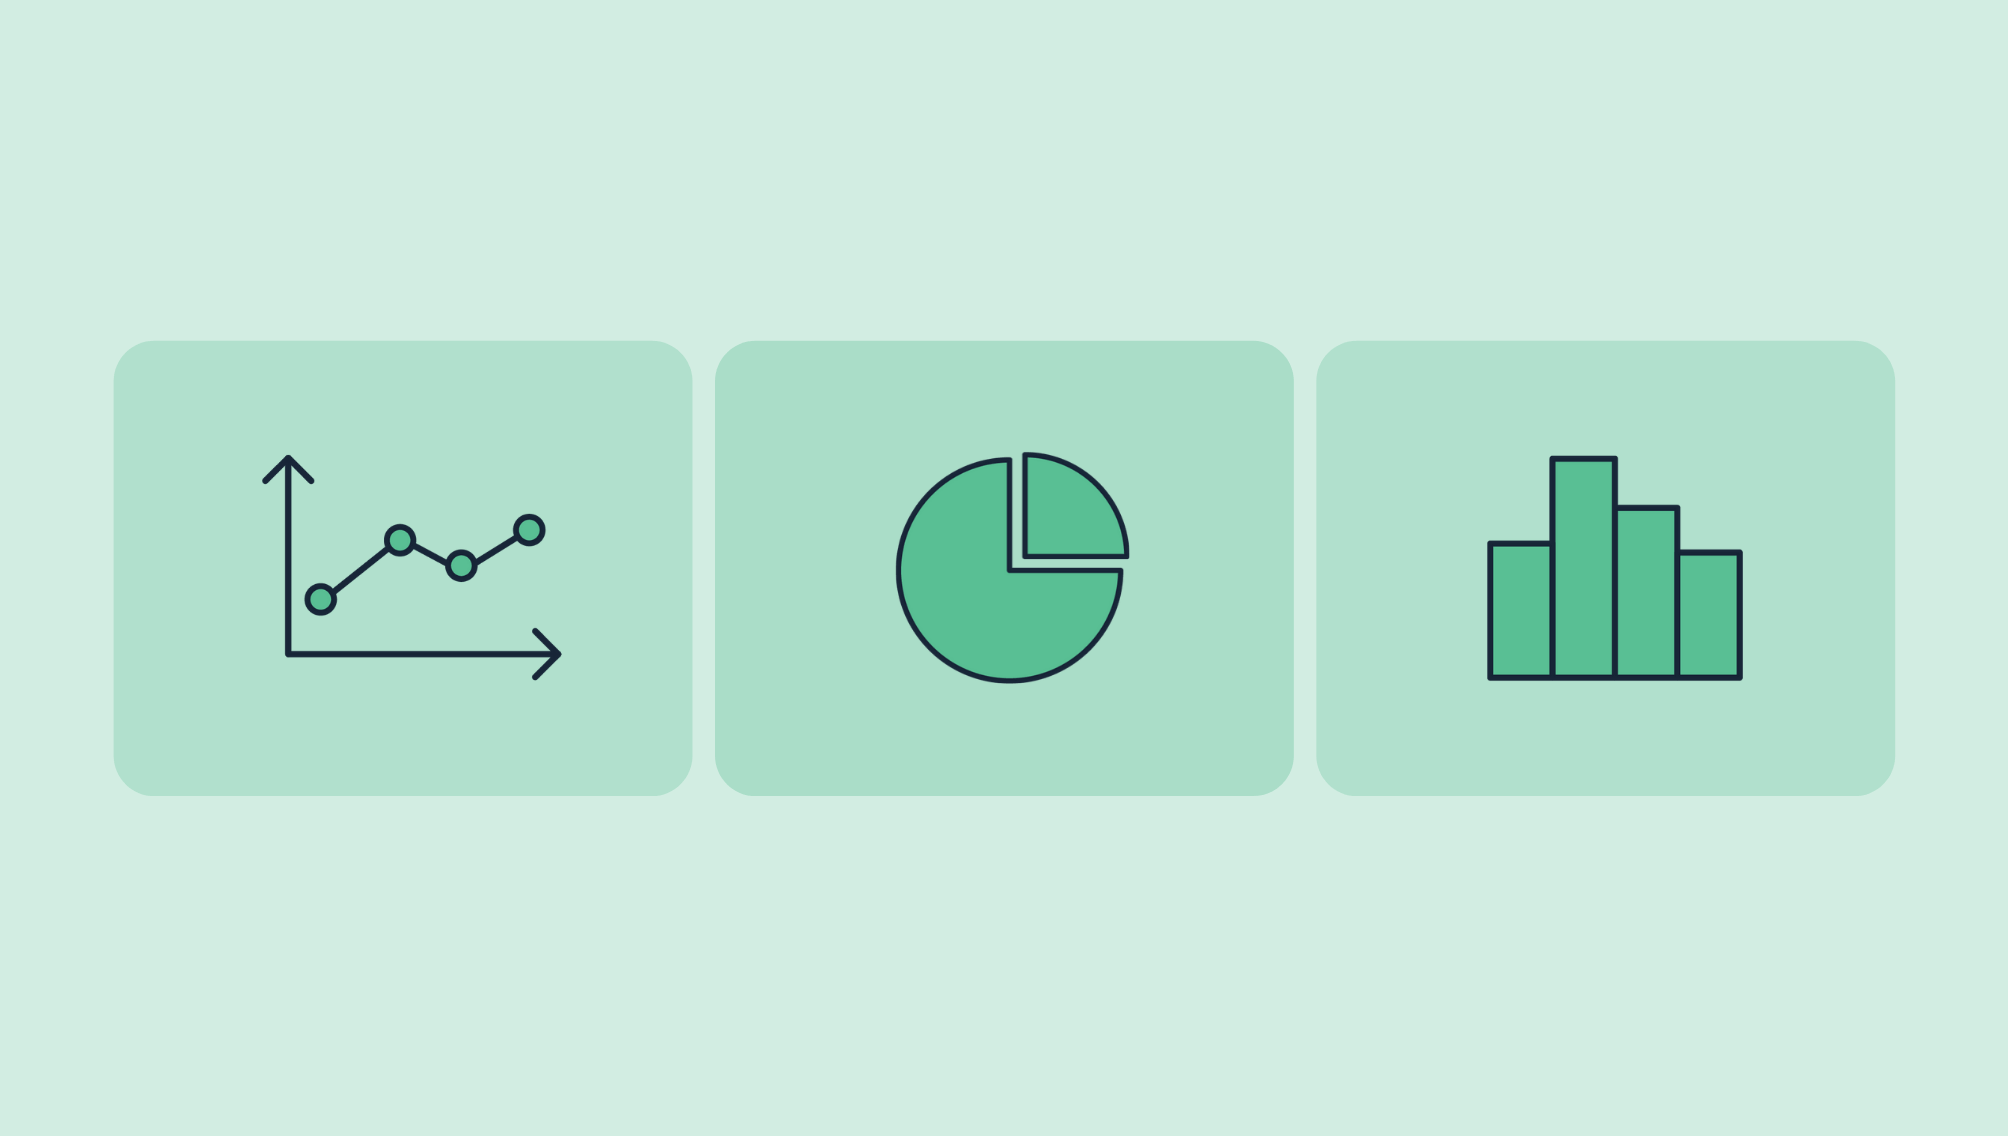 grean icons of a trend line, pie chart, and bar graph